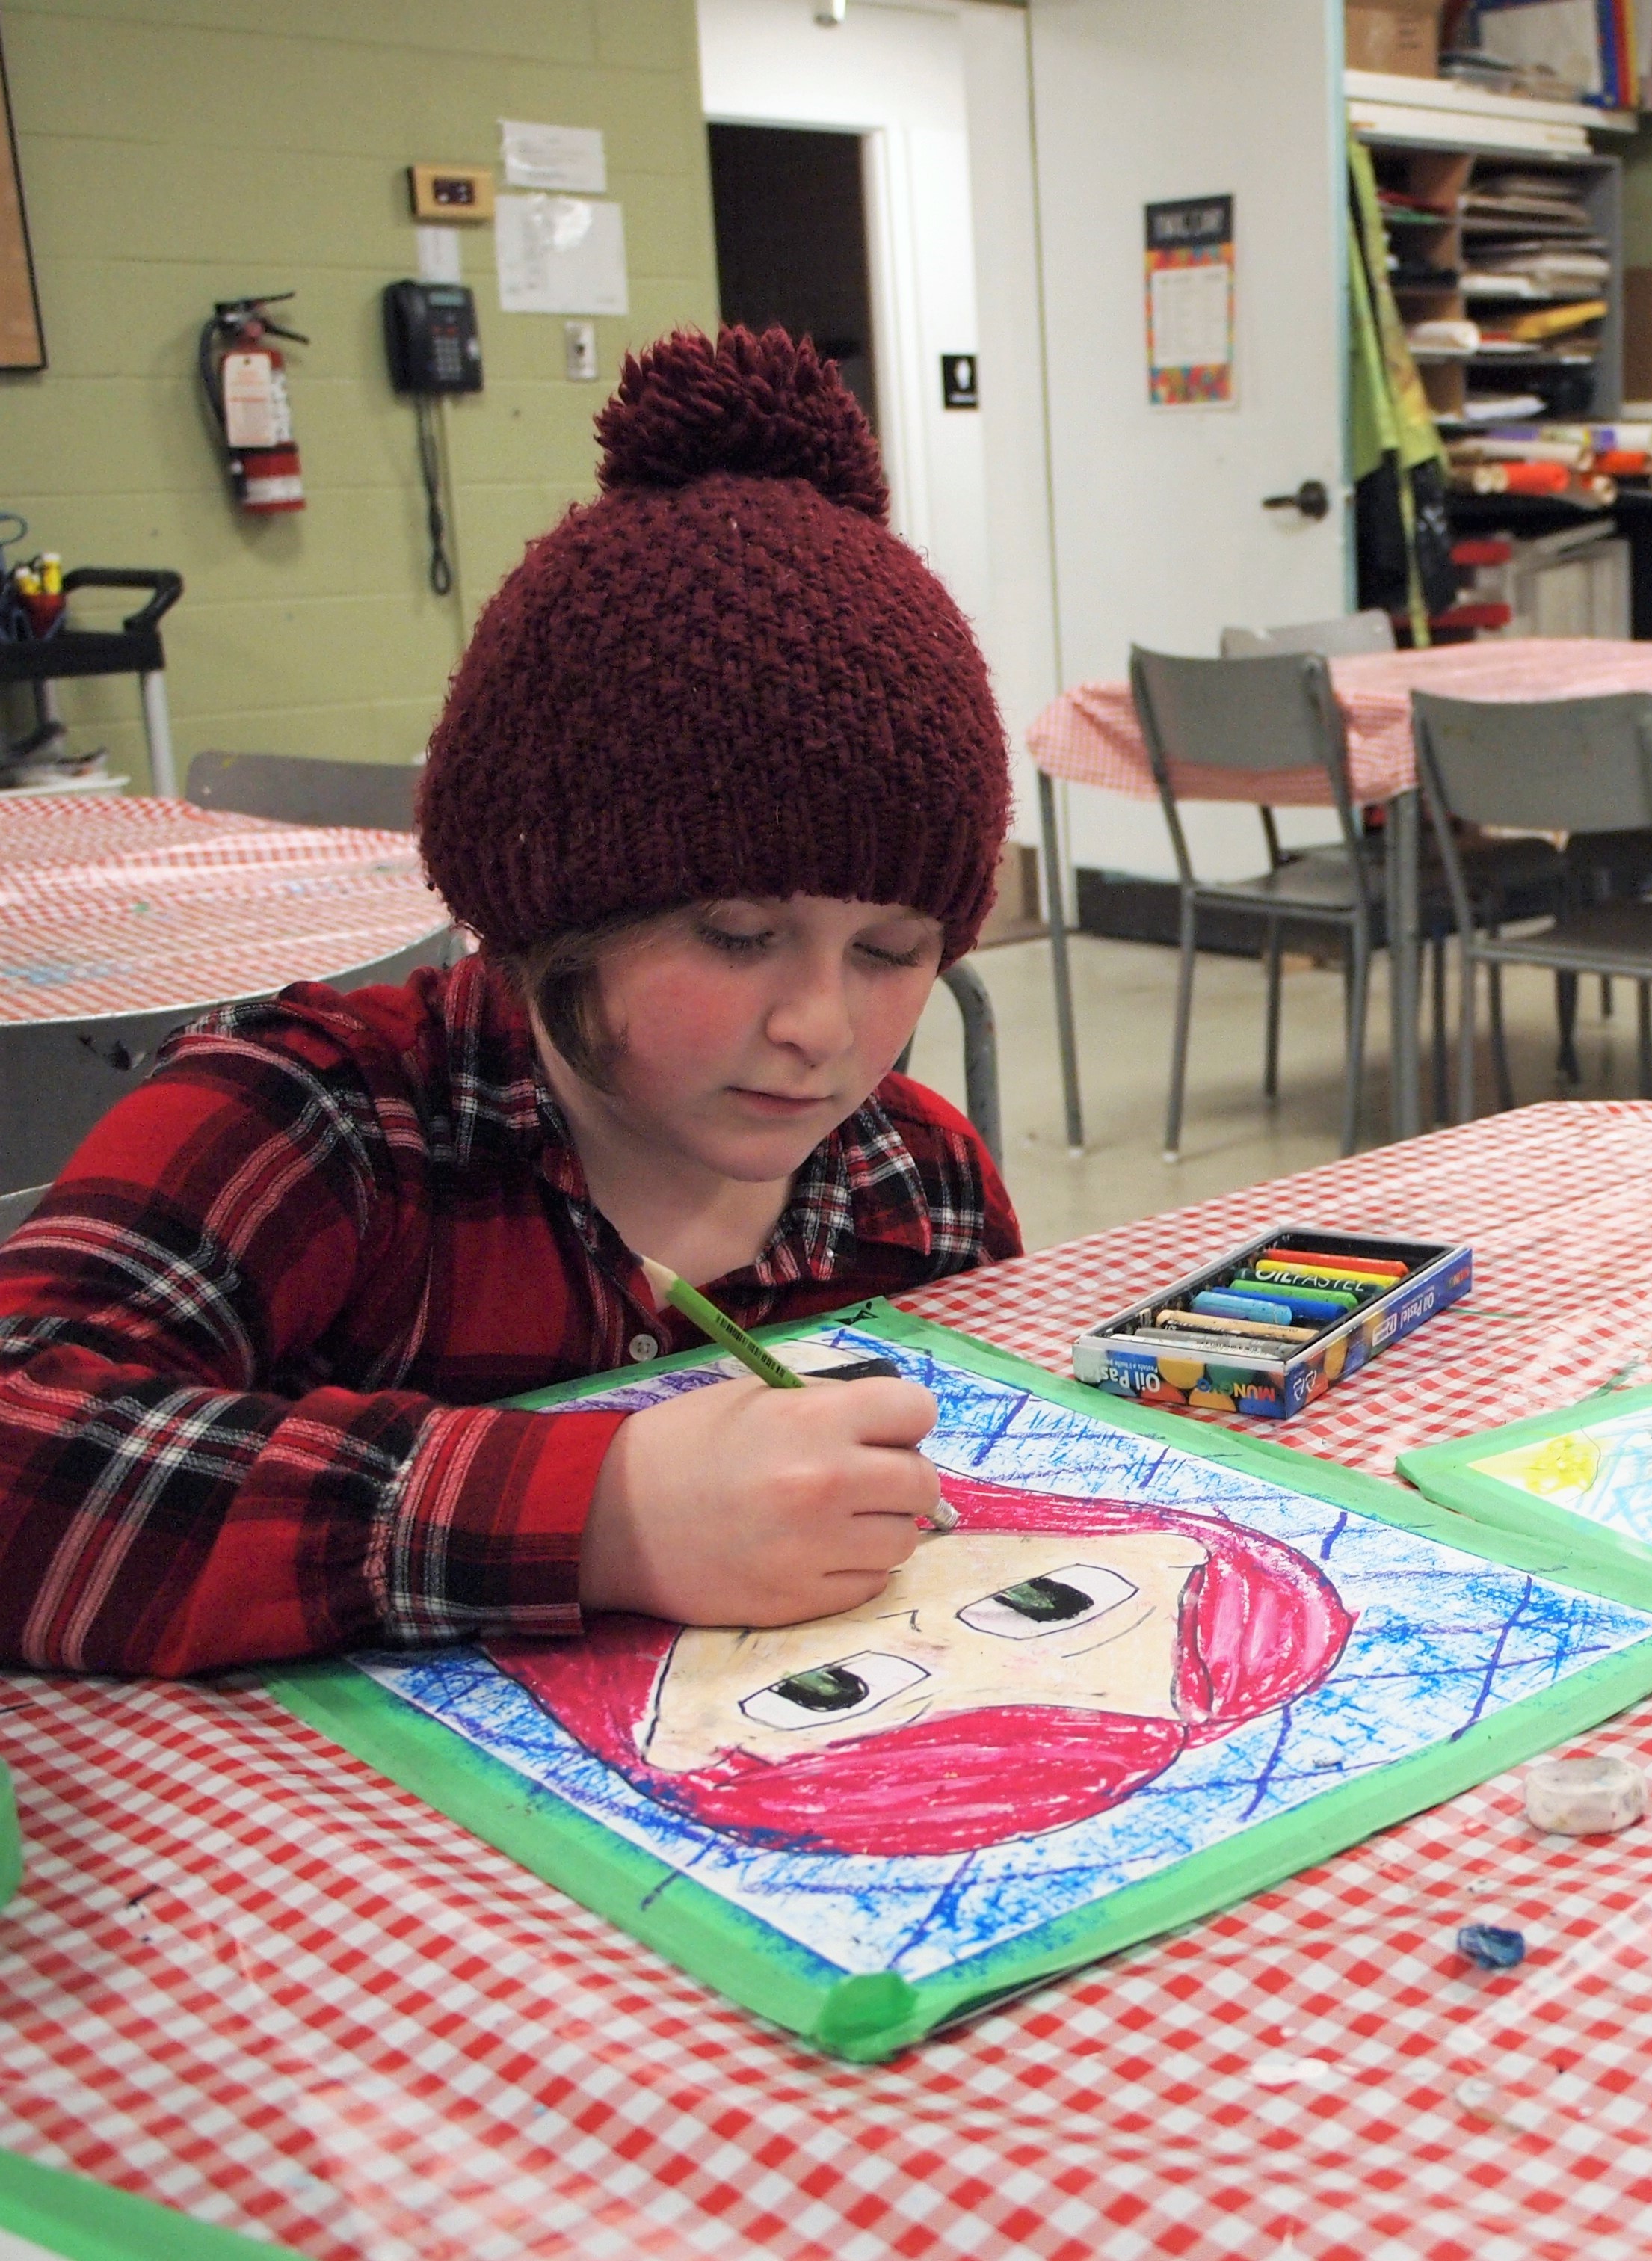 A young girl in a plaid shirt and wooly hat concentrates on drawing a colourful self-portrait